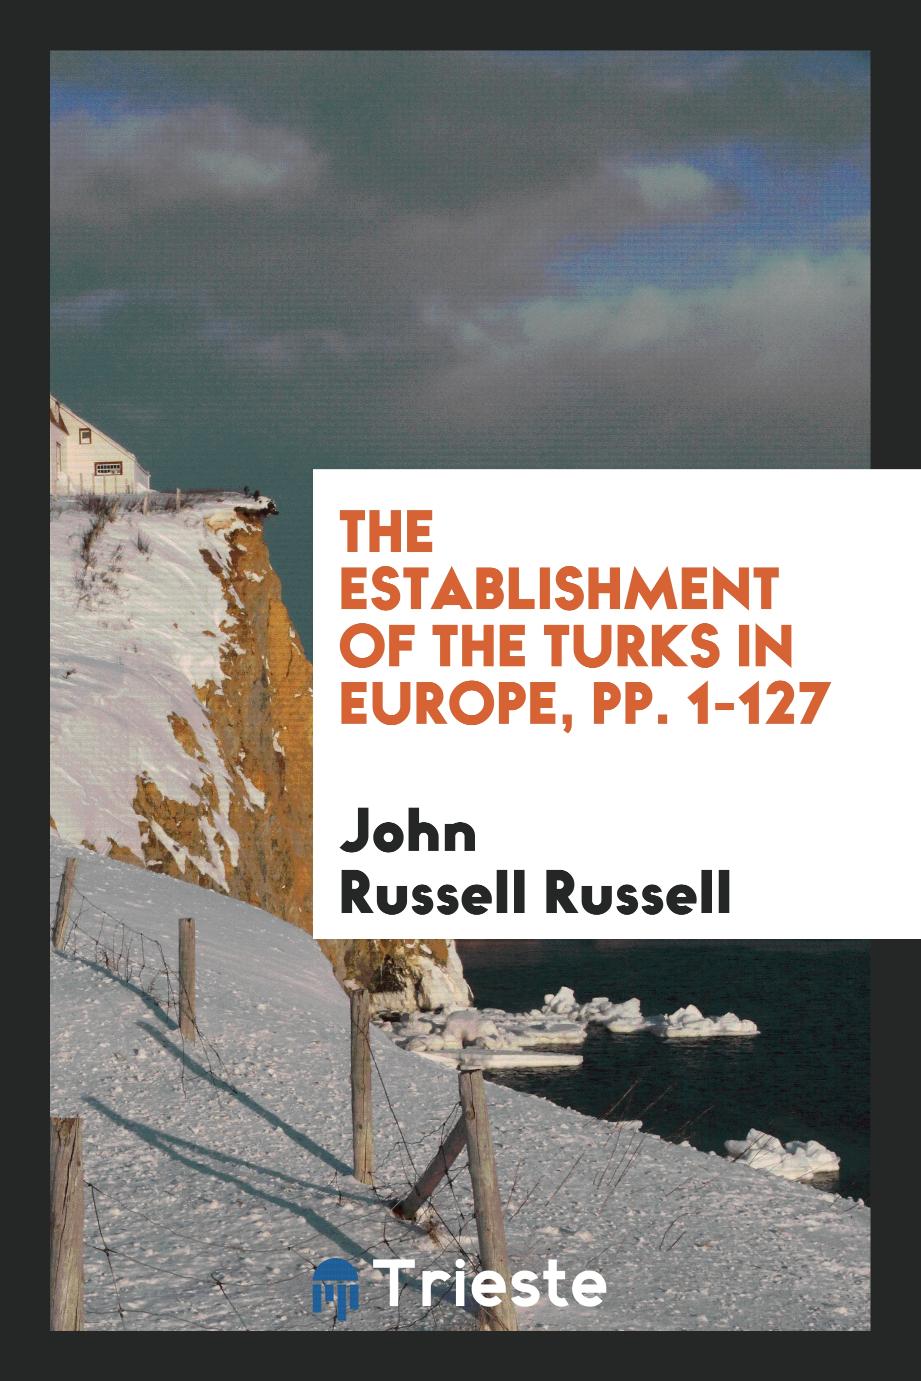 The Establishment of the Turks in Europe, pp. 1-127